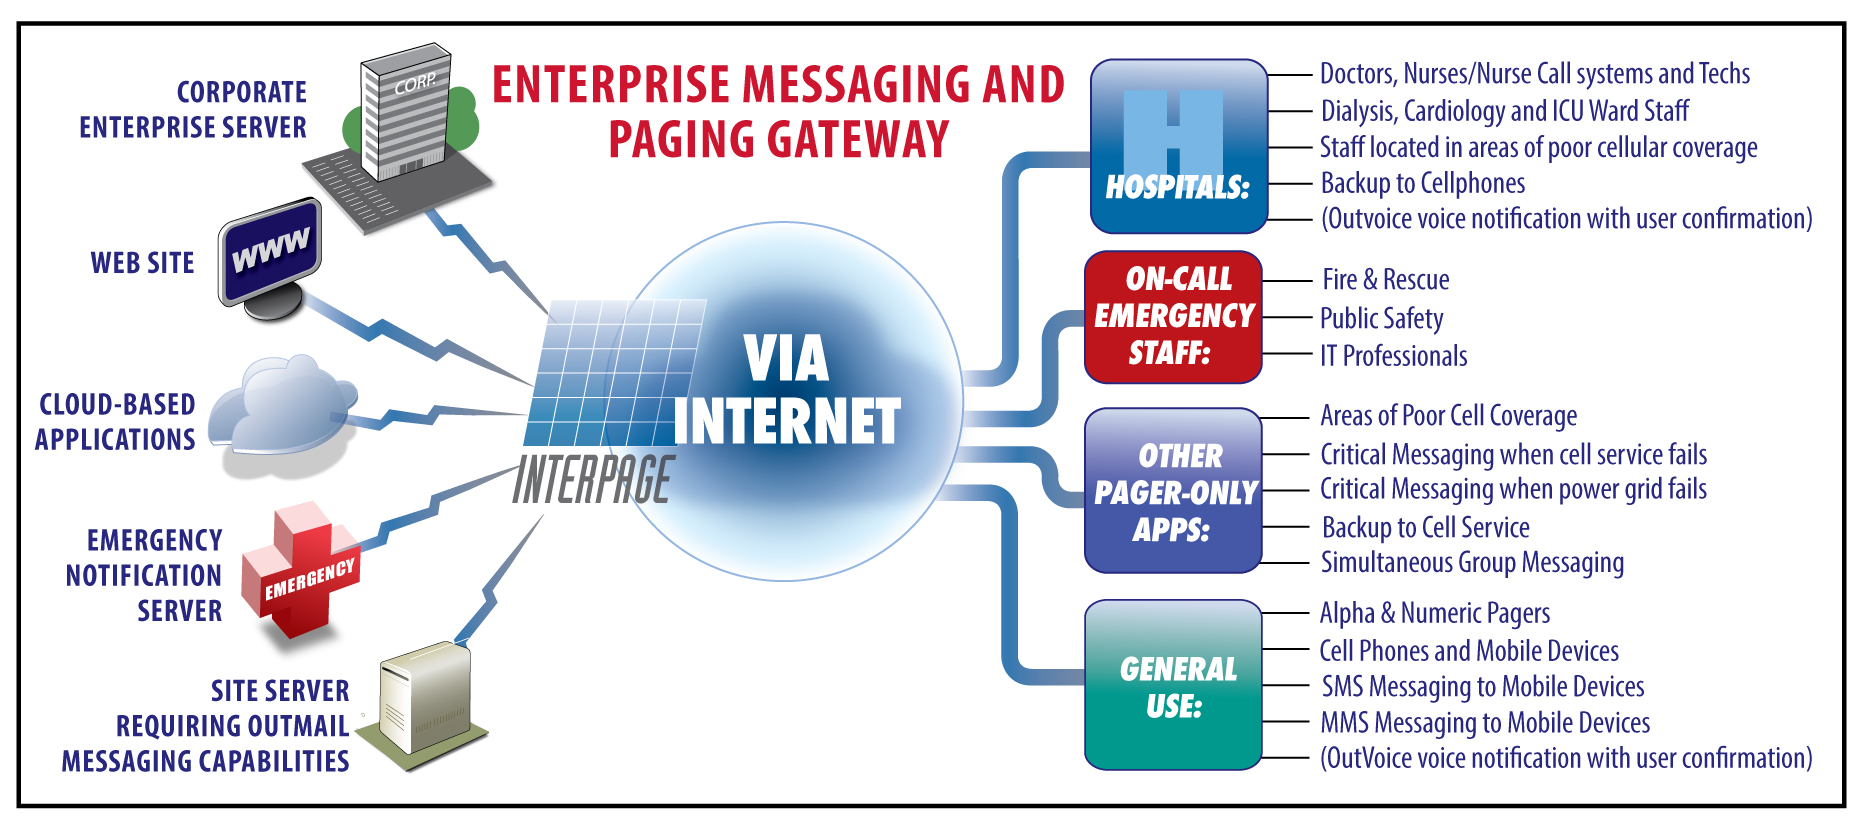 Interpage Messaging and Paging Gateway service diagram showing integration between web servers, messaging gateways, on-call emergency and hospital notification systems, and alarm/coin-op systems and cellular phone, alpha pagers, numeric pagers, and verbal voice notification